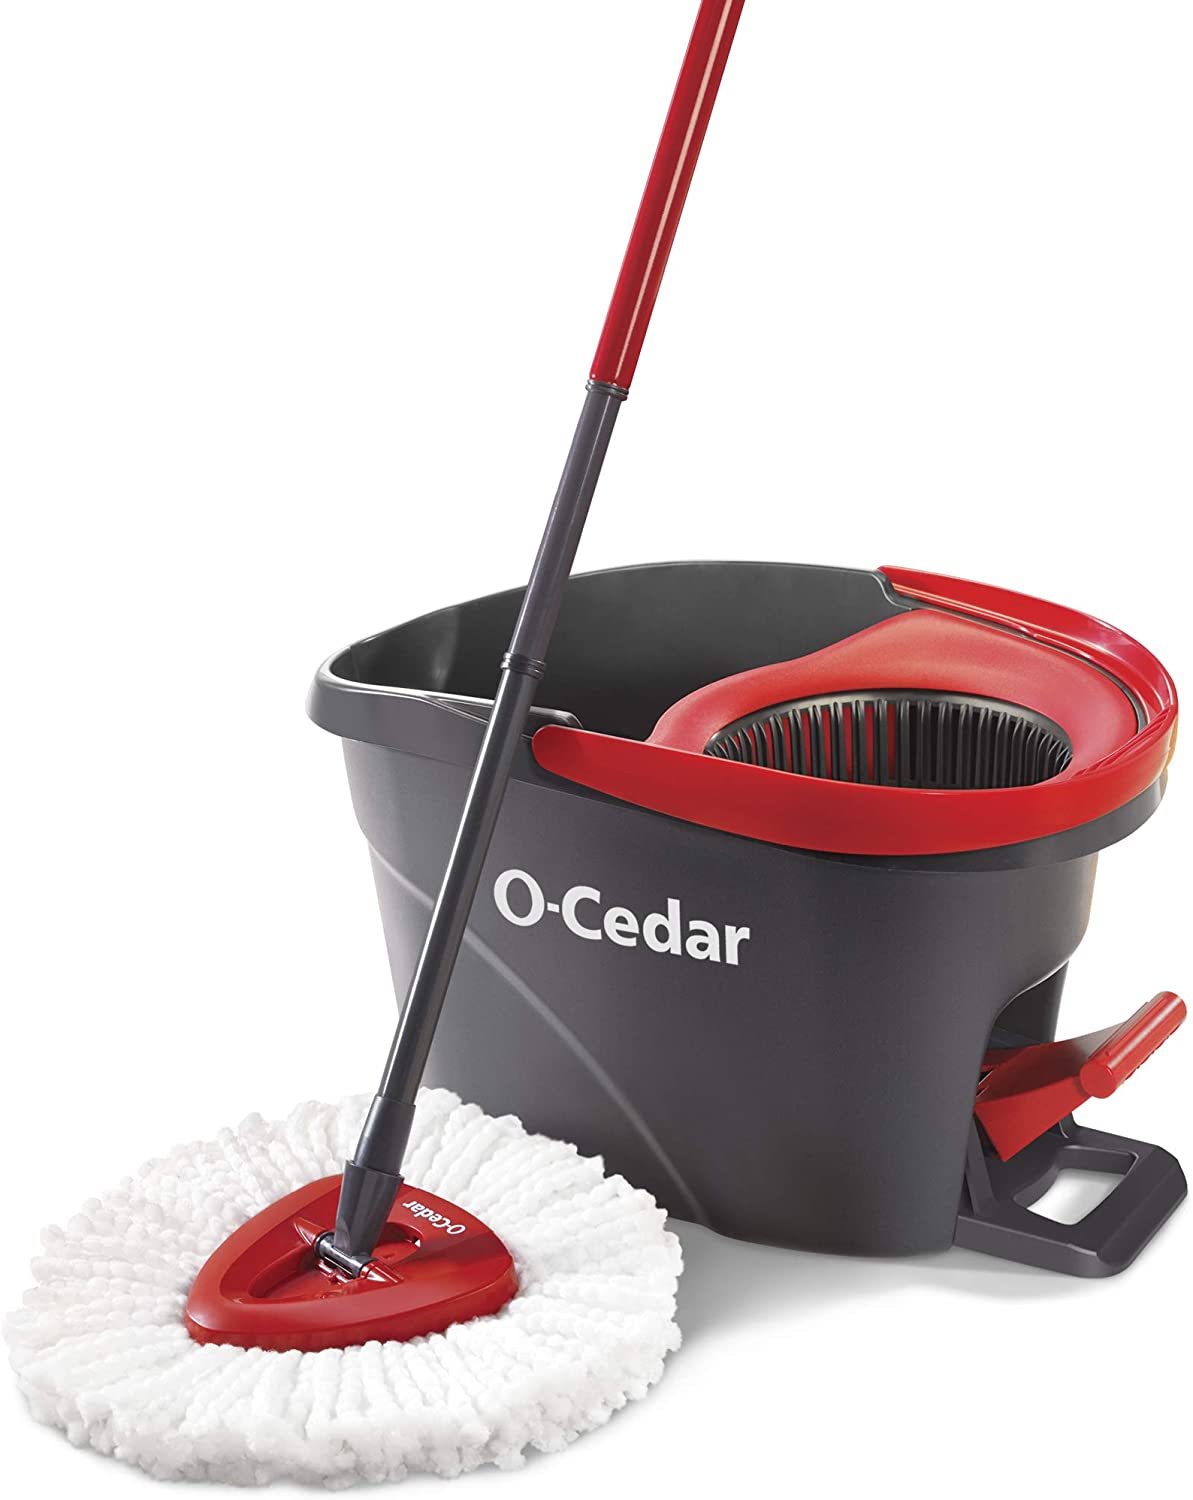 O-Cedar EasyWring Microfiber Spin Mop, Bucket Floor Cleaning System, Red, Gray 7